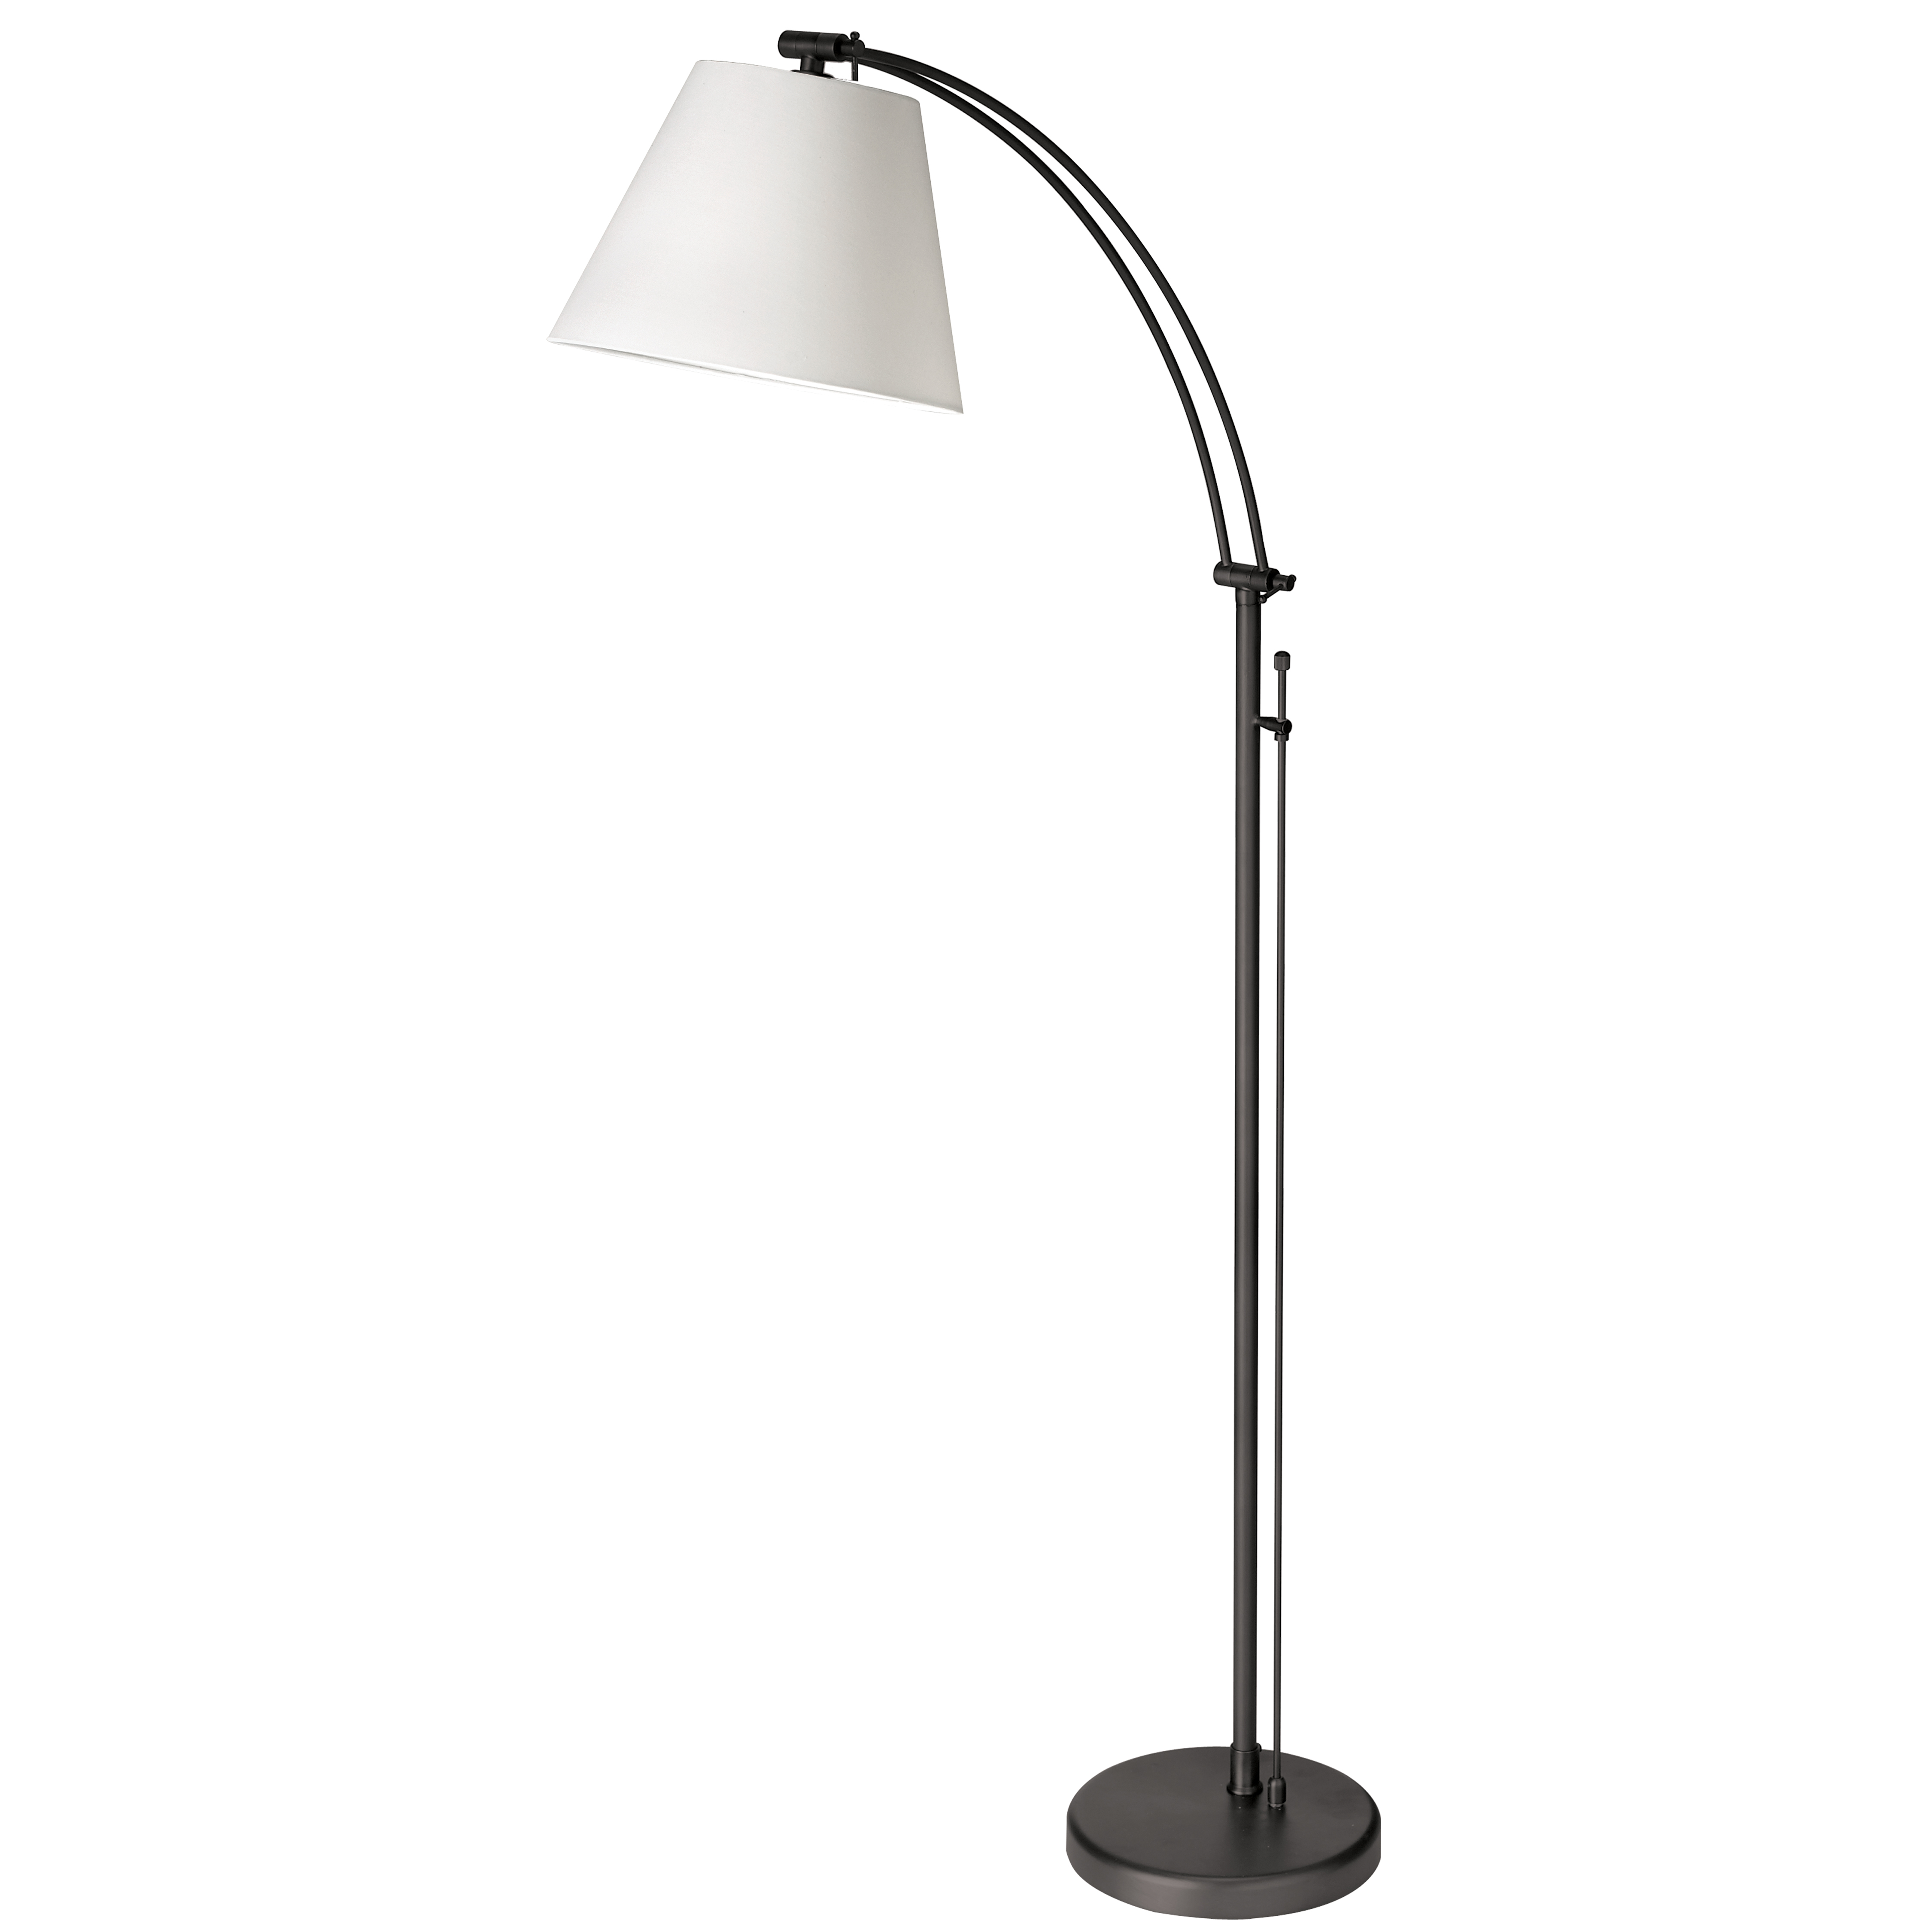 The Felix family of lighting takes a traditional floor lamp design and adds modern convenience and a stylish aesthetic. The angle of the shade can be adjusted to suit your needs. The metal frame and base in your choice of finish incorporates a straight rod that divides in two, with adjustable arms that arc out to the fabric shade. An empire shade completes the fashionable silhouette. With its practical features and clean modern style, Felix lighting is a welcome addition to your living room, bedroom or office space.